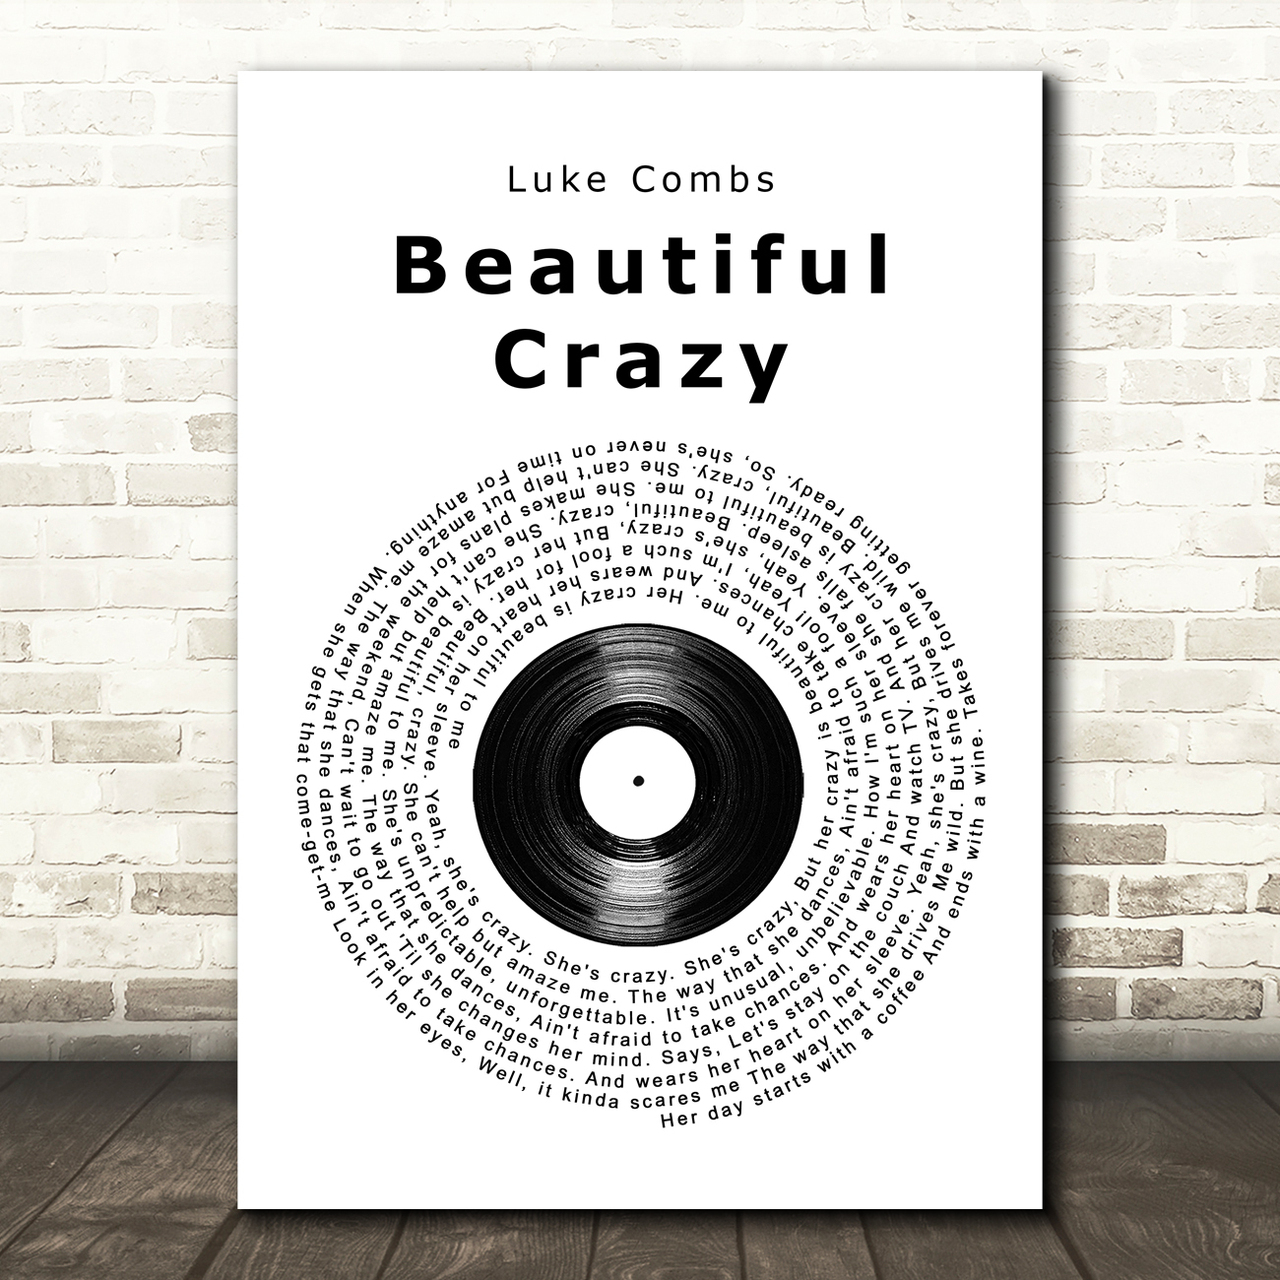 Luke Combs Beautiful Crazy Vinyl Record Song Lyric Quote Music Poster Print